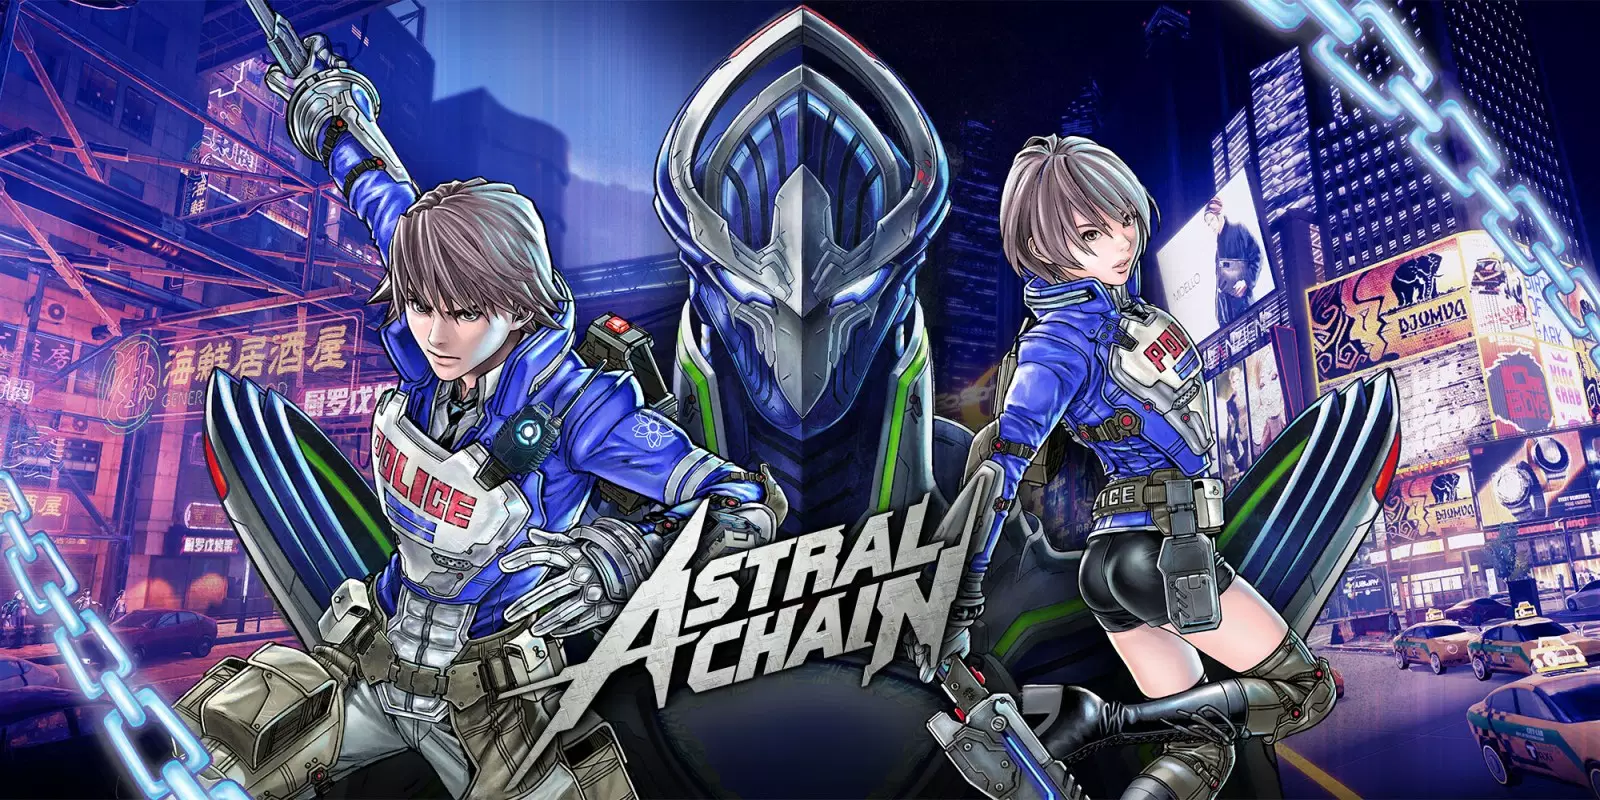 Astral-Chain